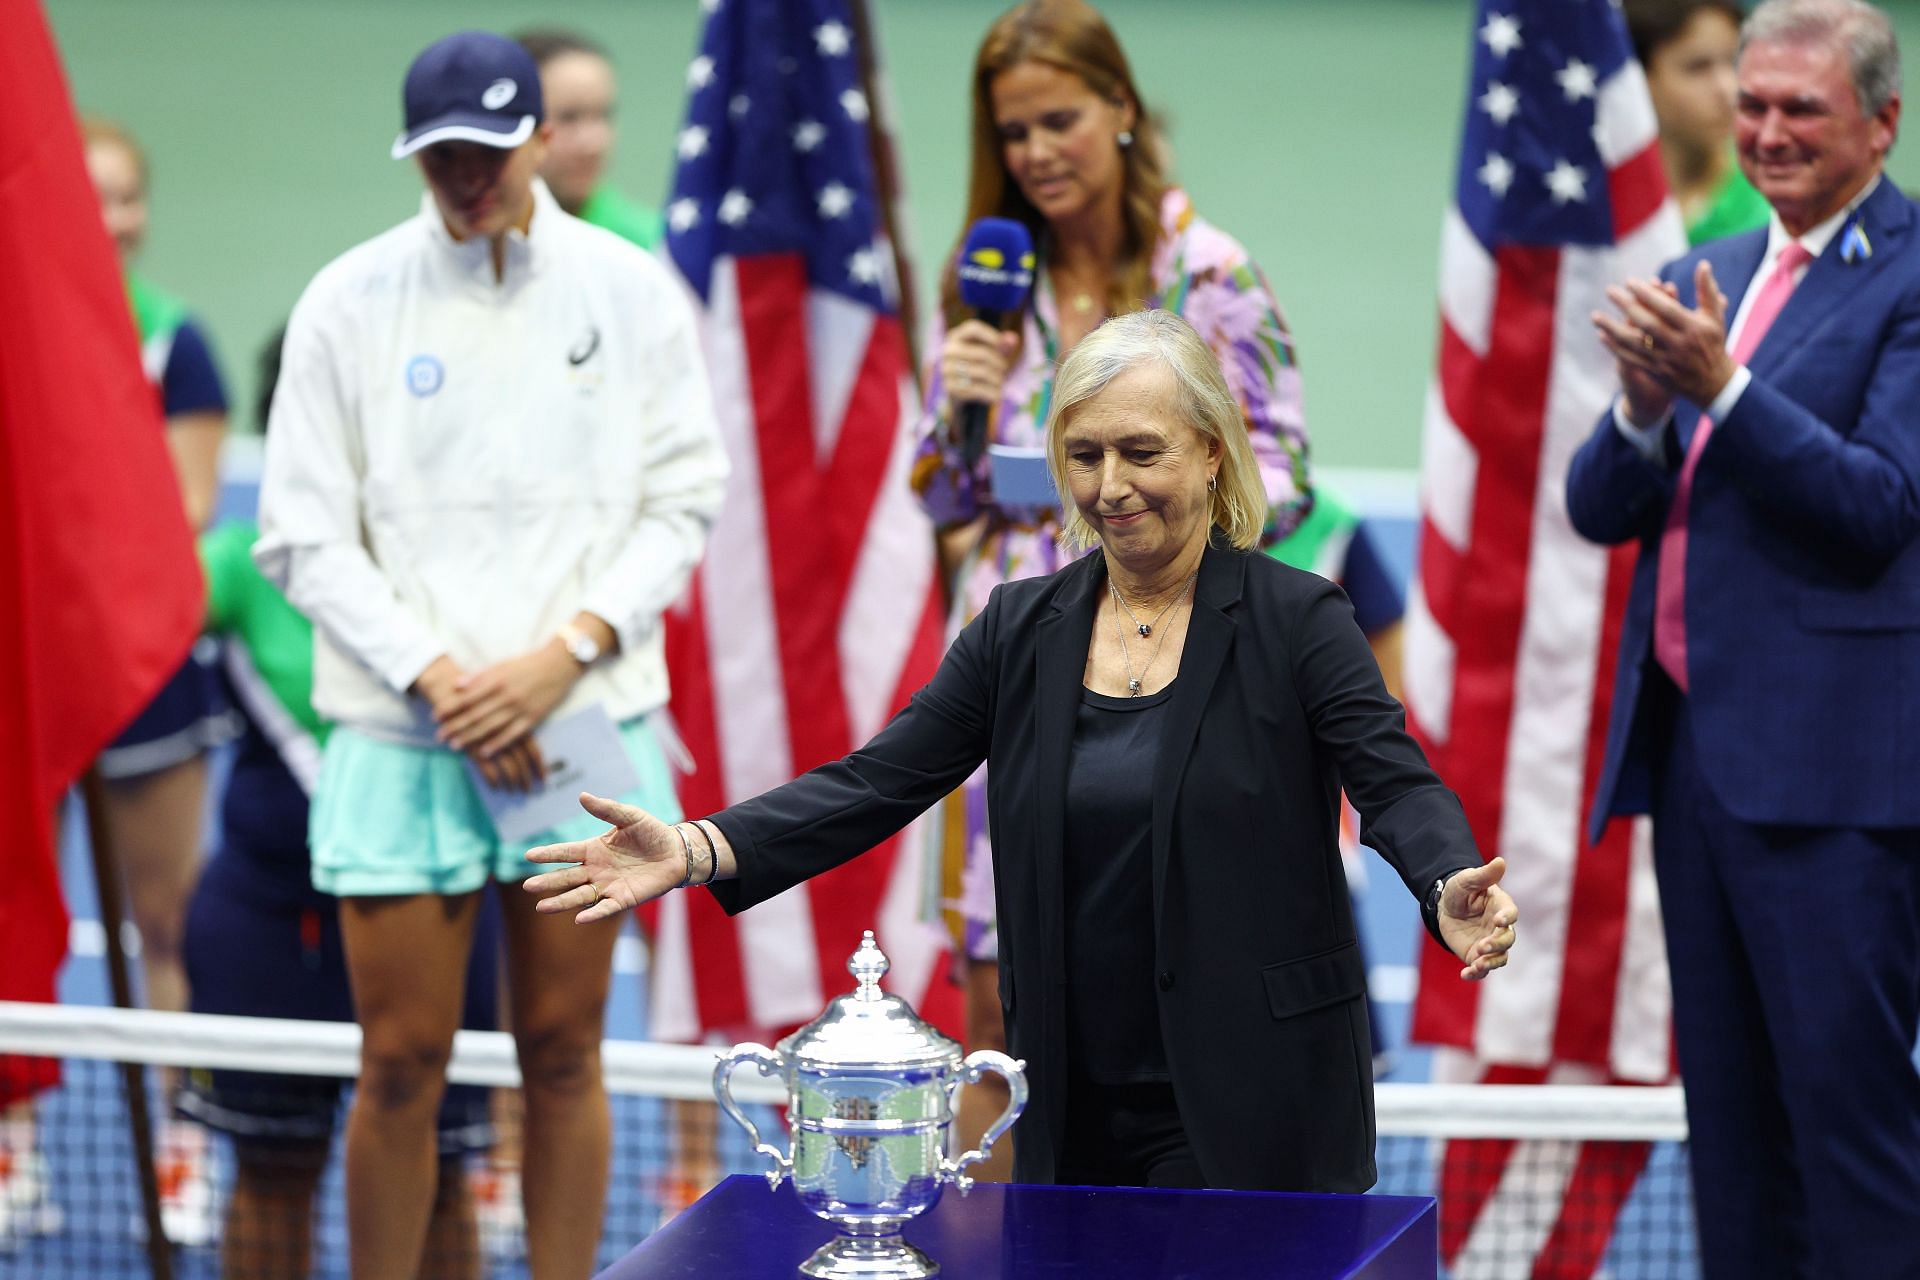 Martina Navratilova presents the championship trophy to Iga Swiatek after she defeated Ons Jabeur at the 2022 US Open 